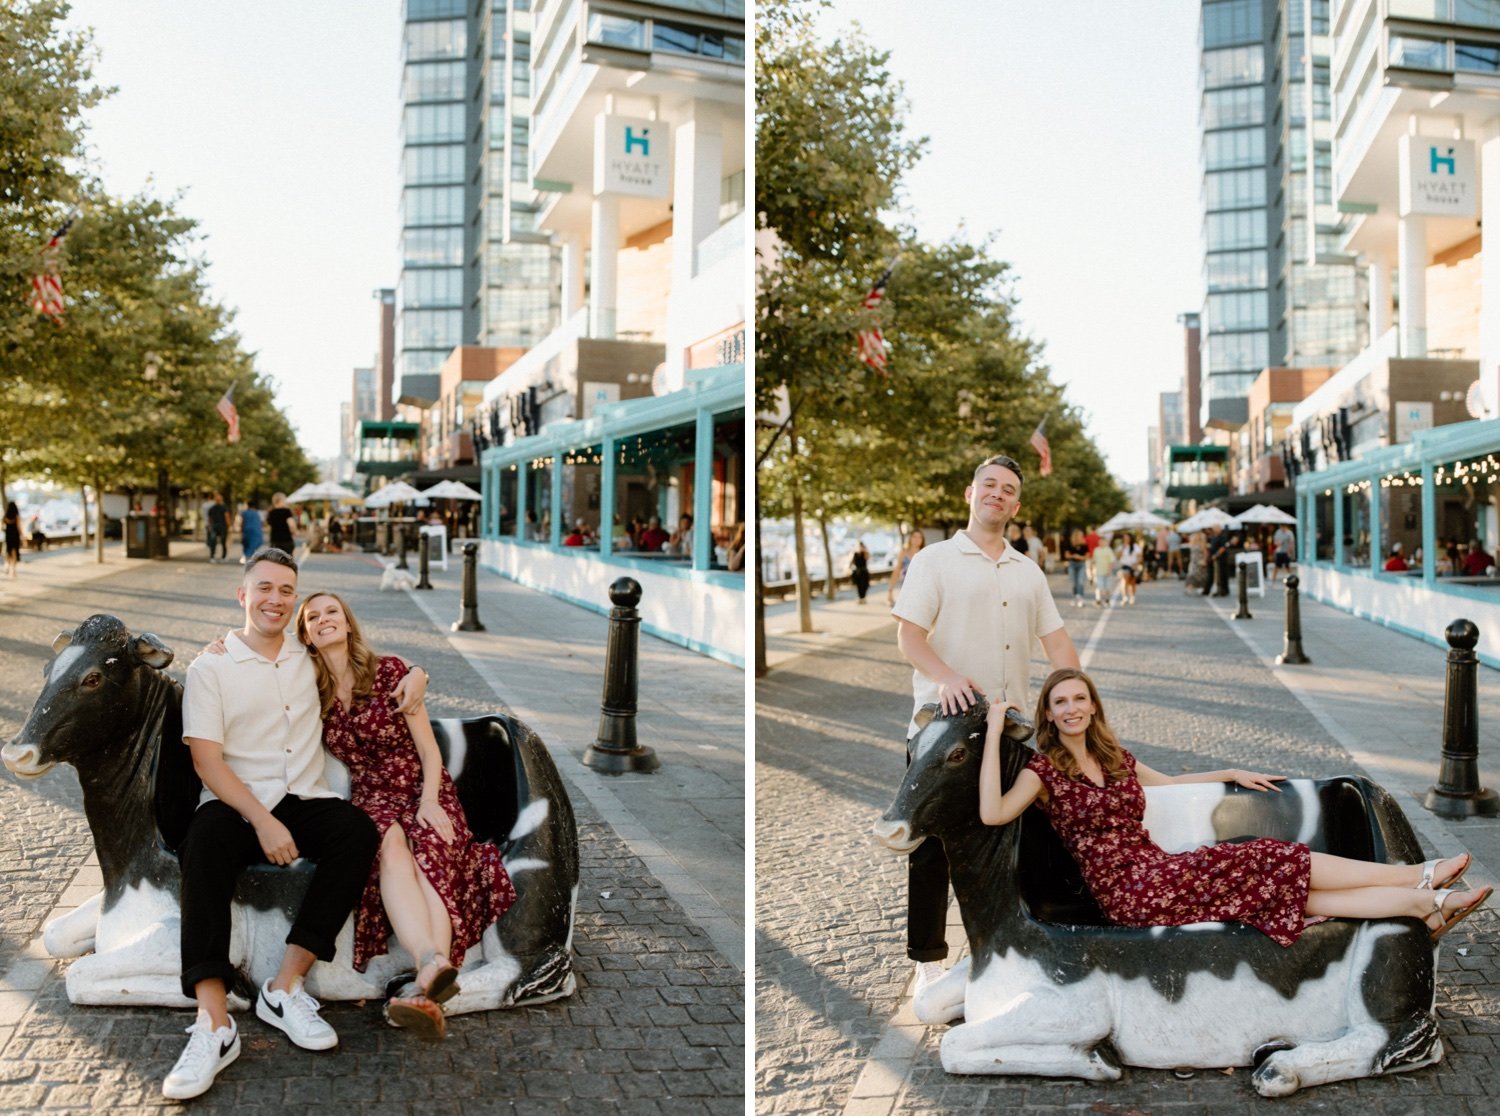 03_The Wharf Engagement Session - Fun - Fountain-1_The Wharf Engagement Session - Fun - Fountain-11_The Wharf Engagement Session in the fountain.jpg